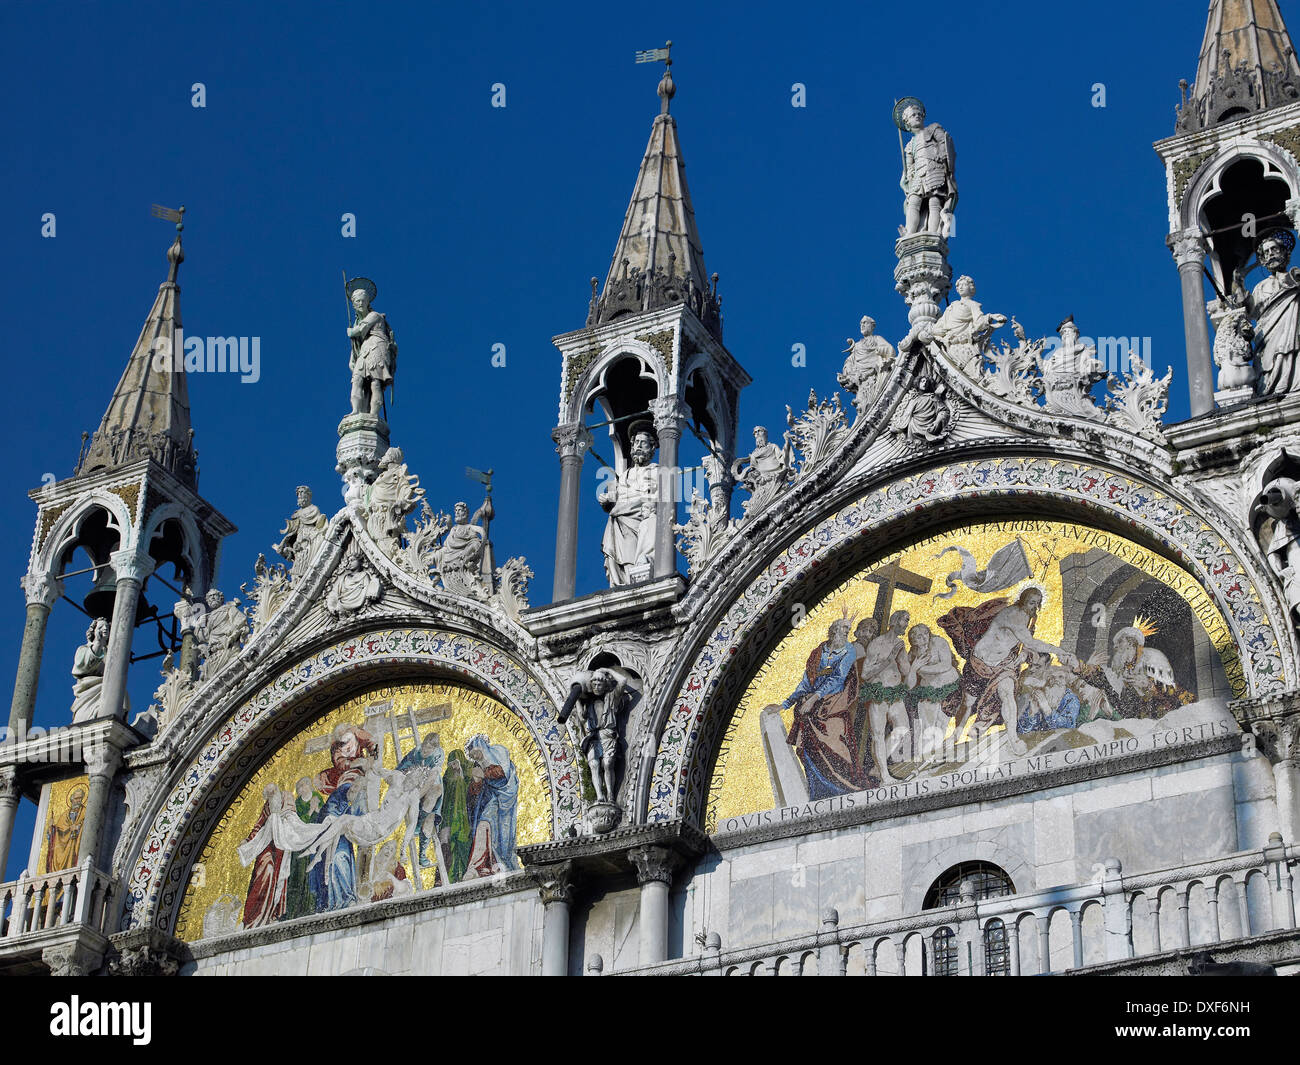 Fine mosaics and detailed statues on the Basilica in St Marks Square in Venice. Italy Stock Photo